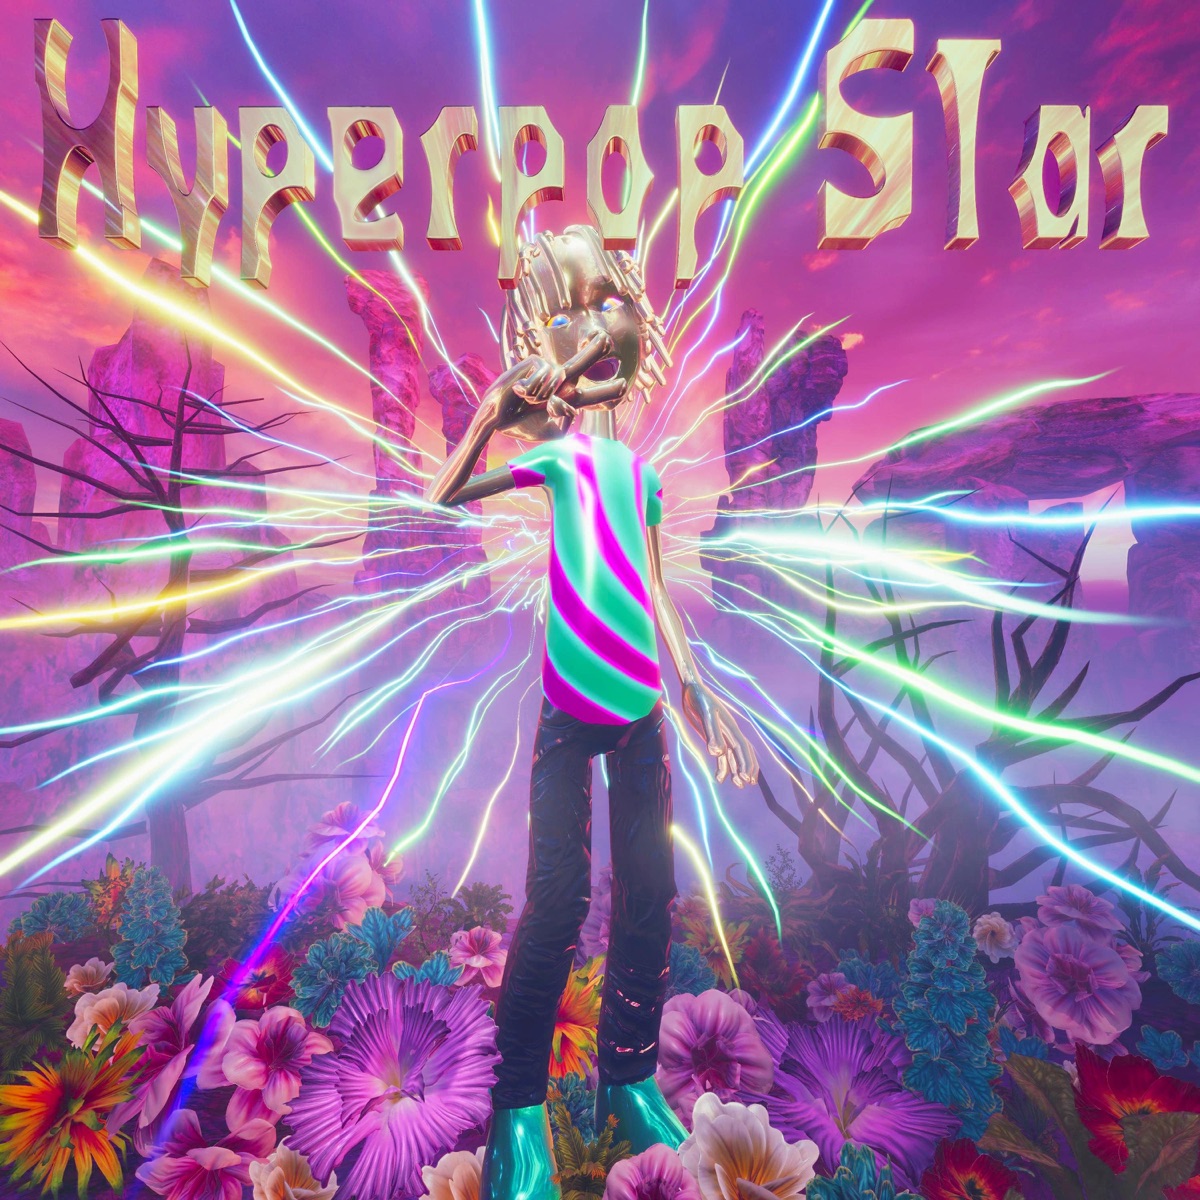 『Only U - Hyperpop Star (feat. ZOT on the WAVE)』収録の『Hyperpop Star (feat. ZOT on the WAVE)』ジャケット